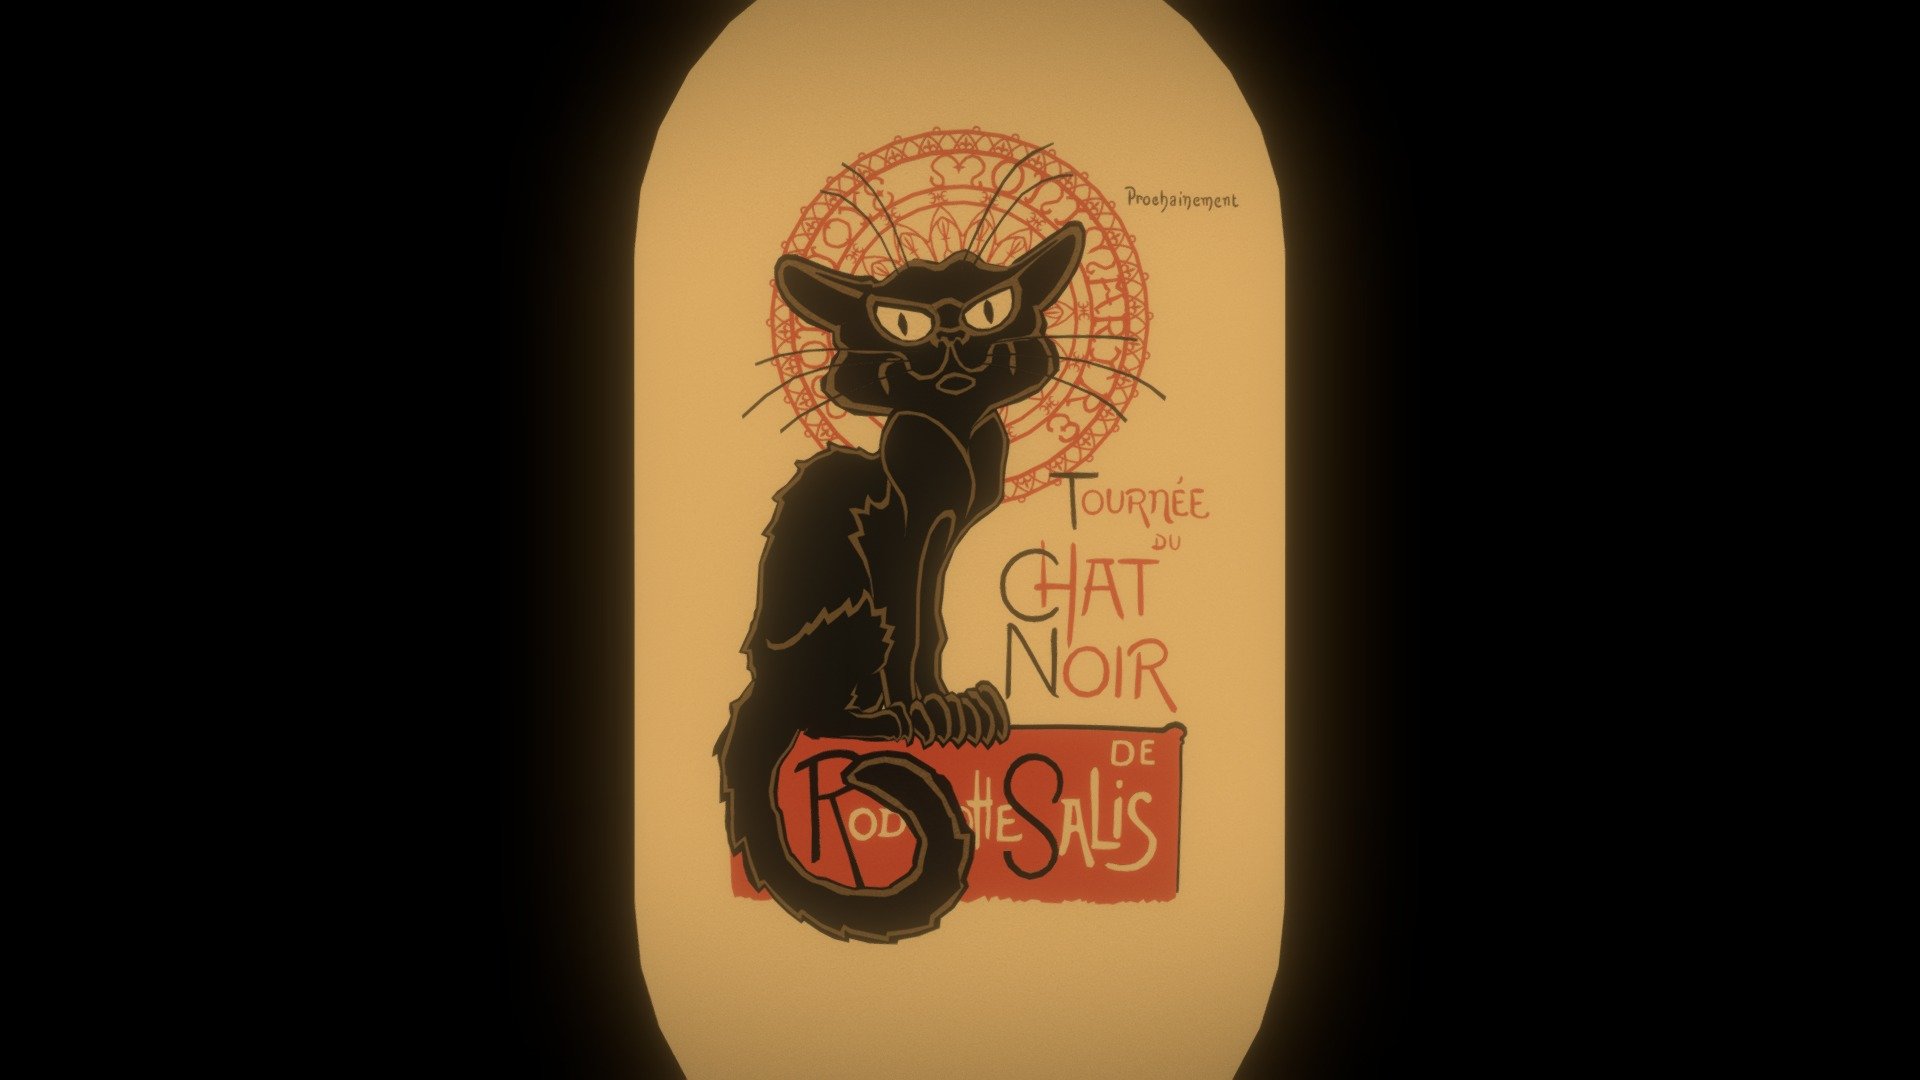 This is a tribute to French Art Nouveau painter Théophile Steinlen (1859-1923) and his iconic Le Chat Noir poster (1896), advertising a coming soon tour of the Le Chat Noir's troupe of cabaret entertainers.
The depth of 2.5D model is created by layered of flat polygonal shapes, inspired by layered paper sculpture.
The chibi (big headed) version has a simple looping animation to have it lively looking around with a swinging tail.
Here's the original tribute: https://sketchfab.com/models/21d3df0bf4b345fc8e9dd47b68077b63
(Source image linked from Wikipedia)
 - Le Chat Noir Chibi 2.5D - 3D model by hinxlinx 3d model